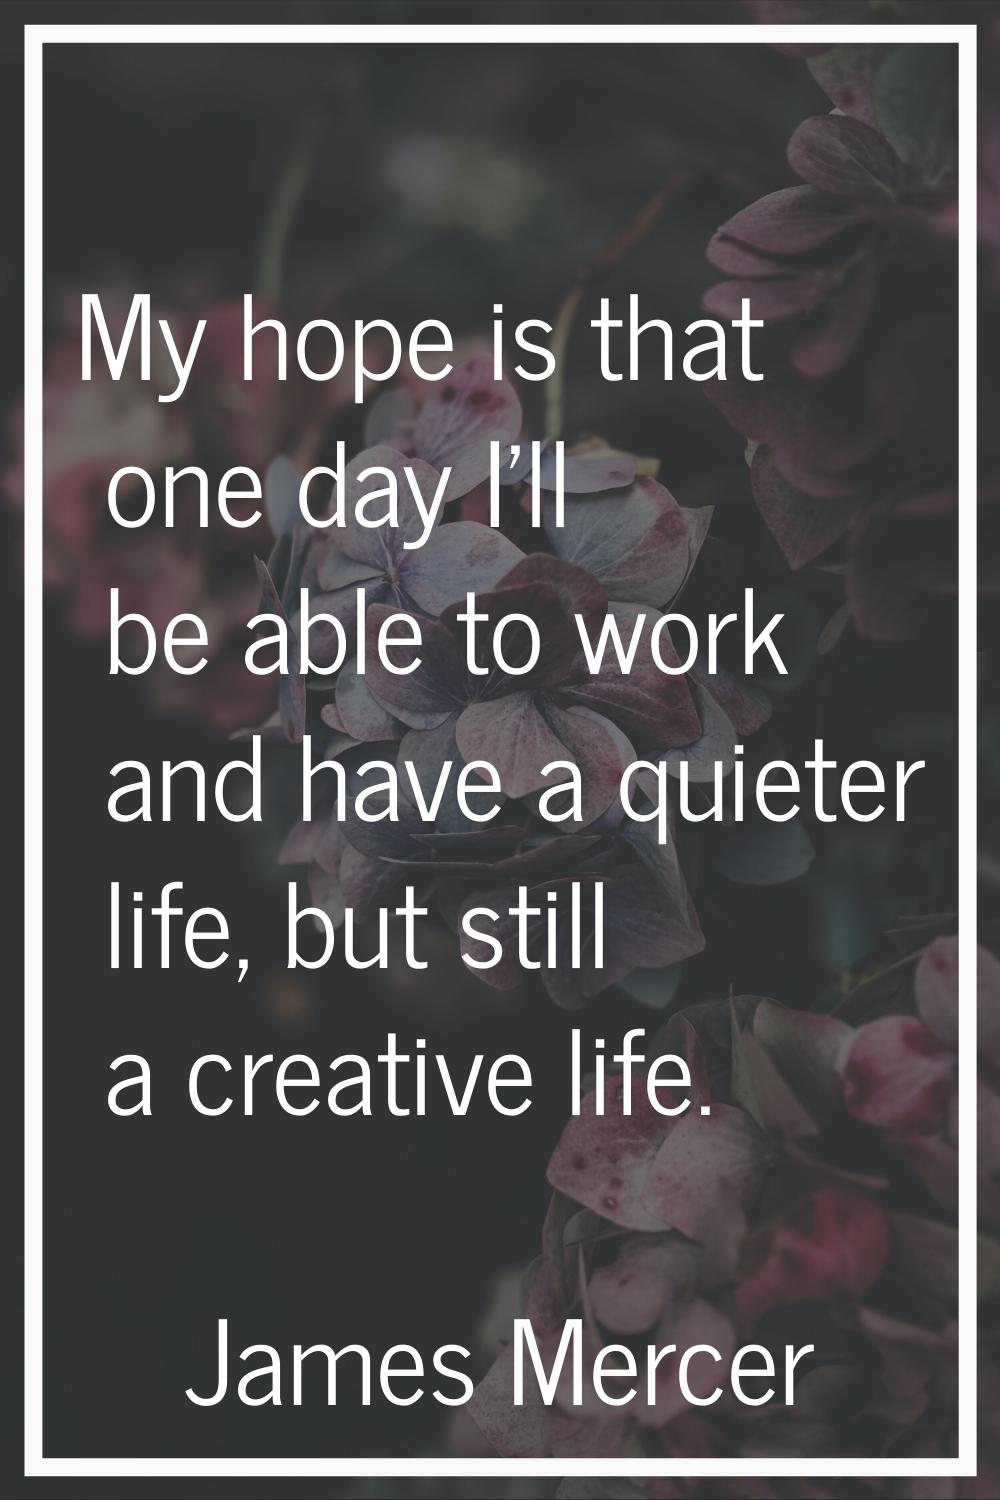 My hope is that one day I'll be able to work and have a quieter life, but still a creative life.